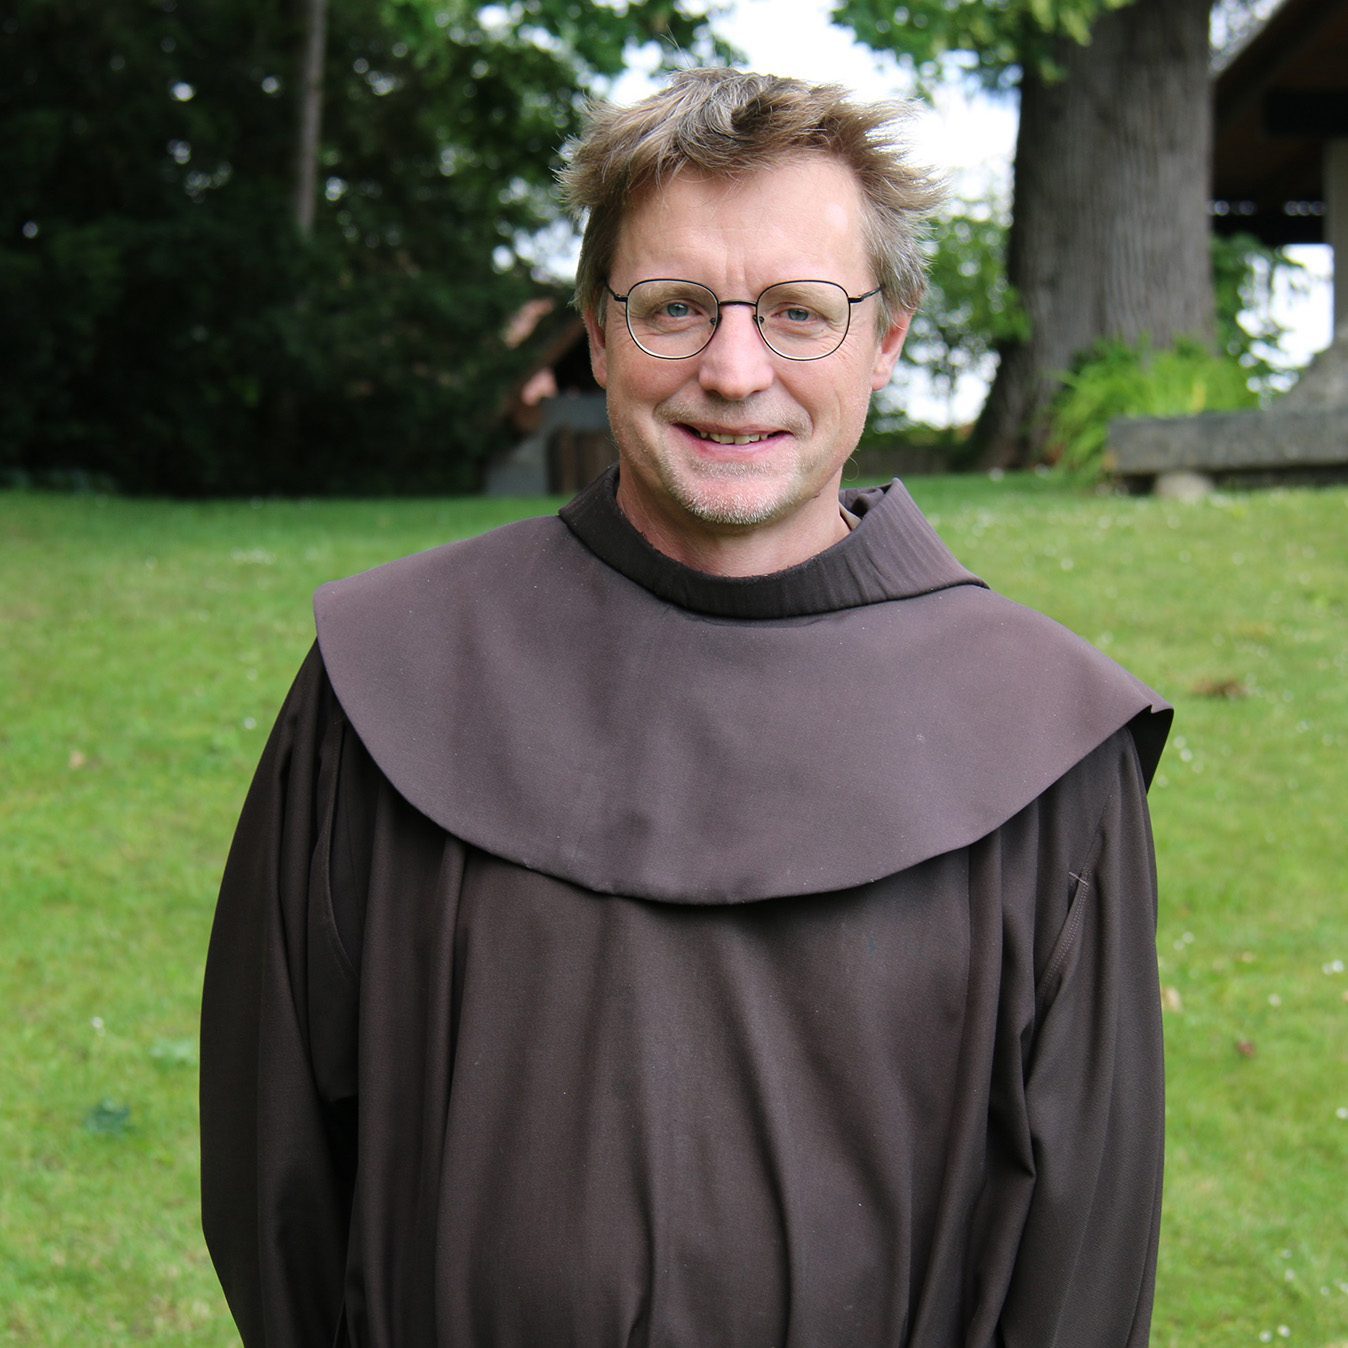 Br. Pascal M. Hollaus OFM